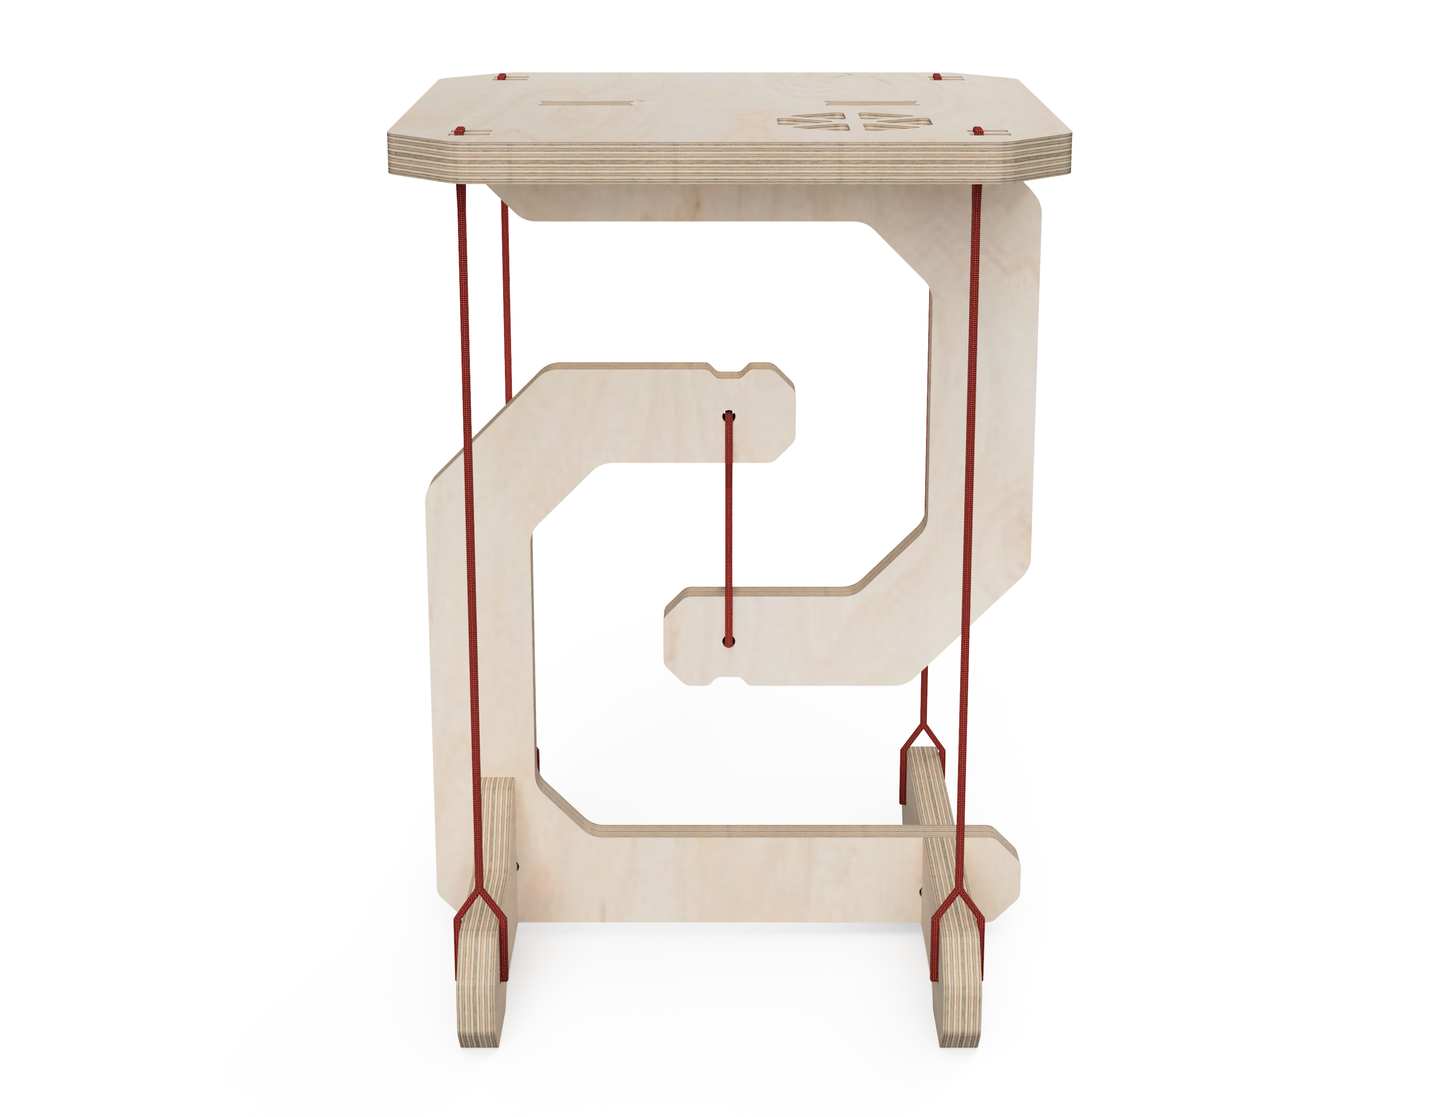 Tensegrity stool DXF file